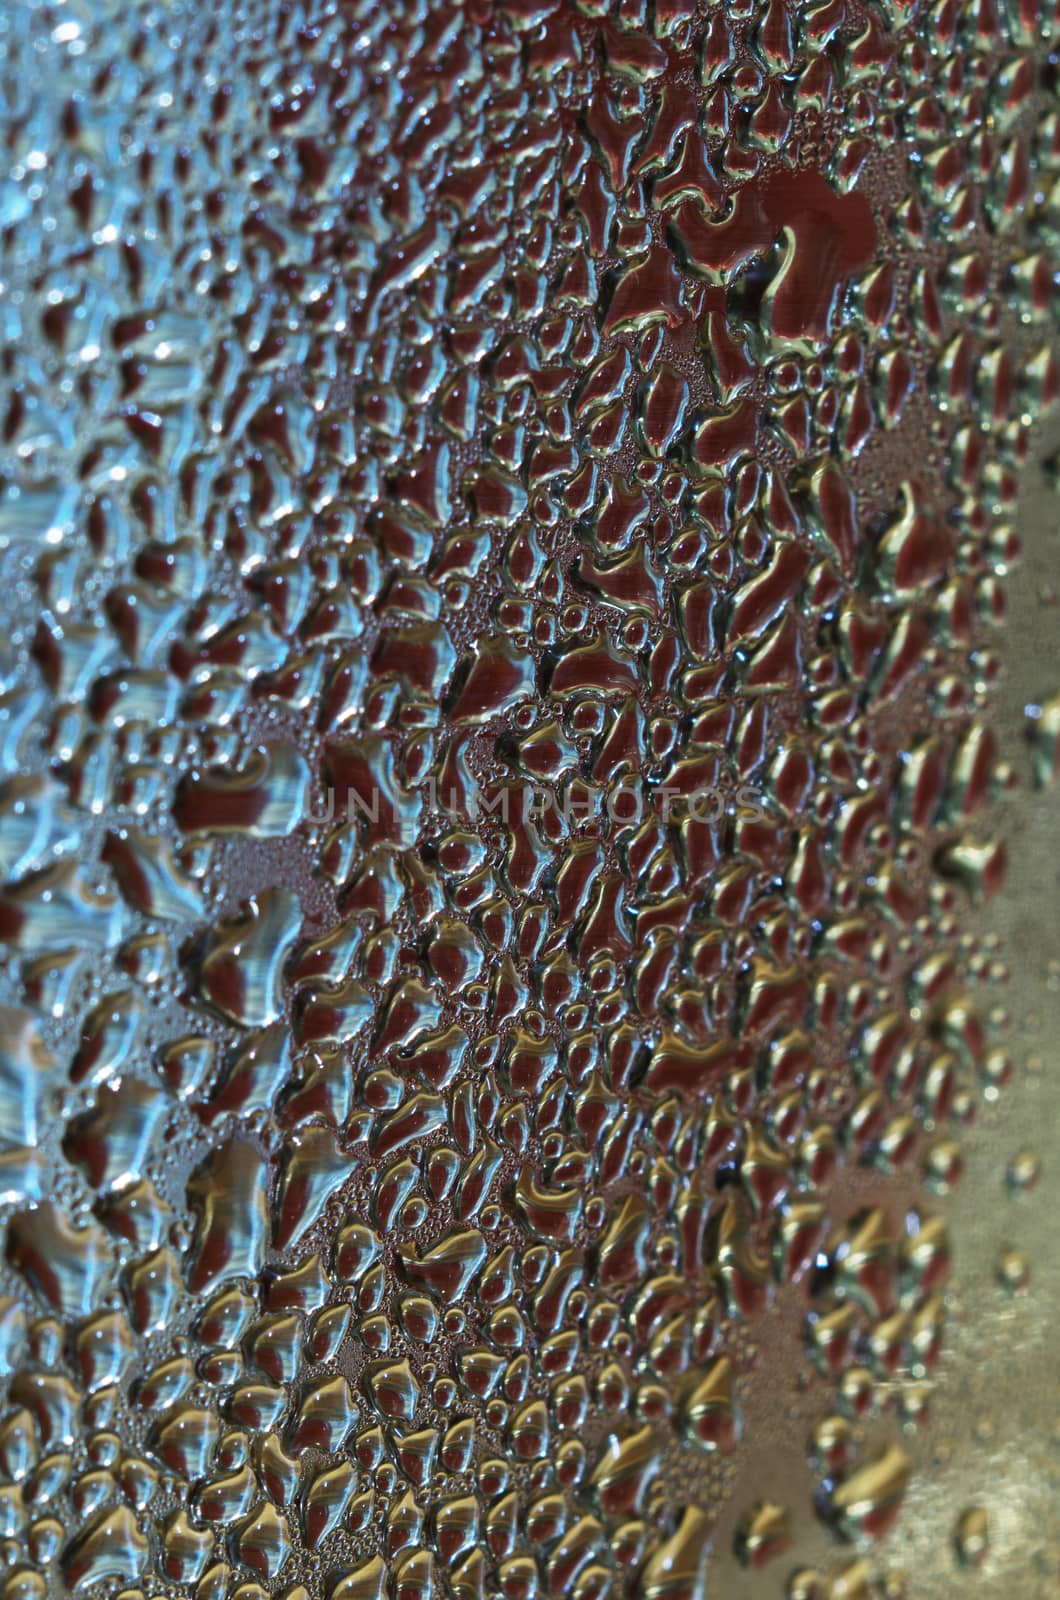 Water drops on metallic surface  by daoleduc